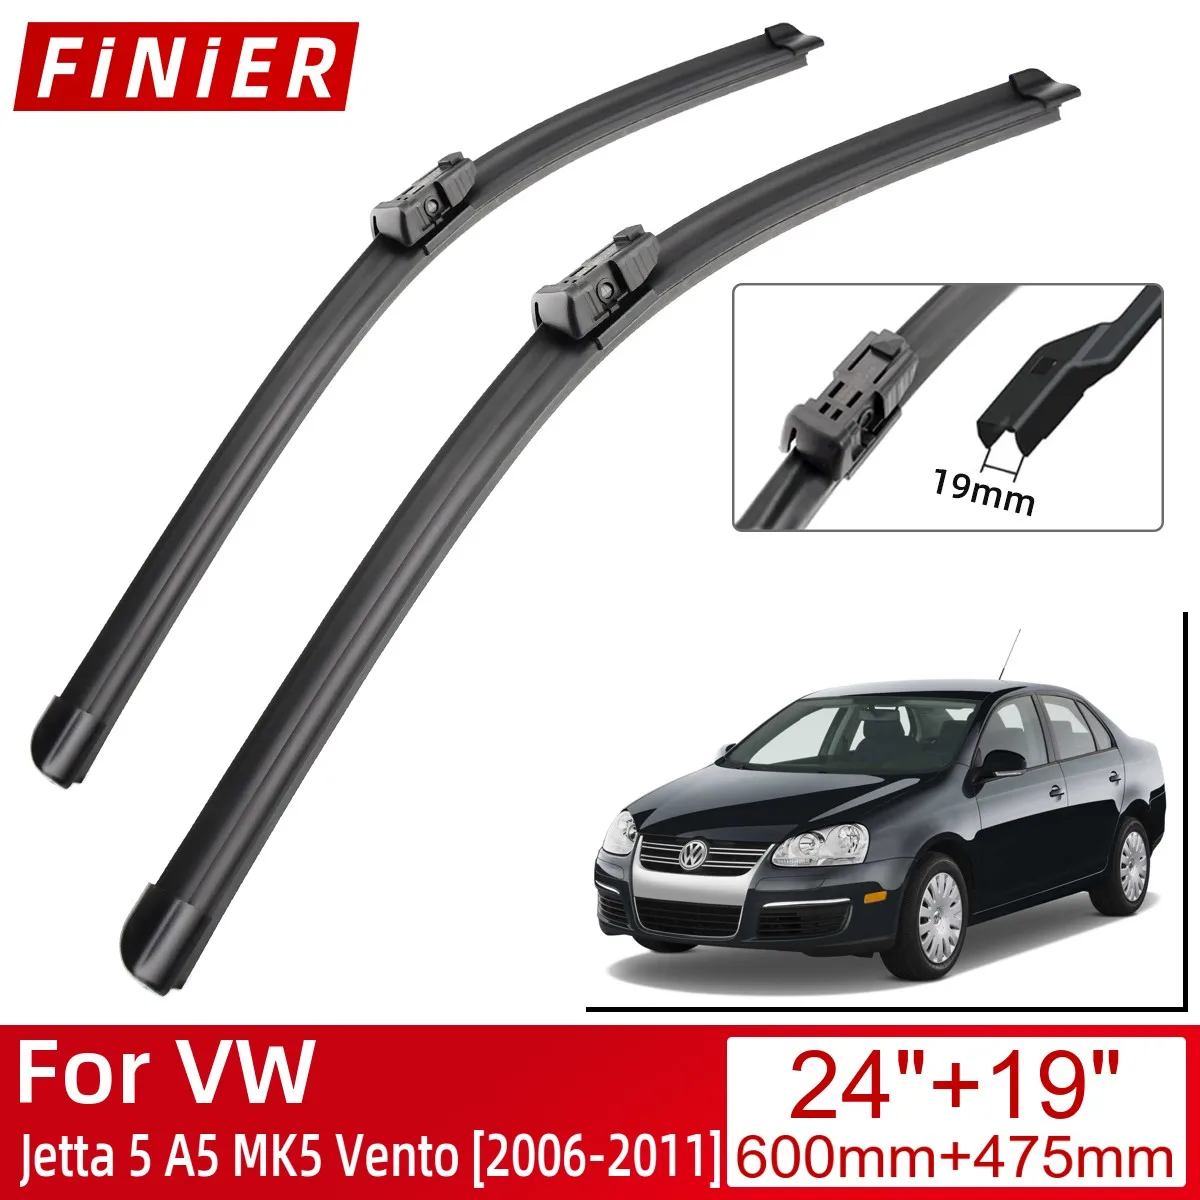 

For VW Jetta 5 A5 MK5 Vento 2006-2011 Car Accessories Front Windscreen Wiper Blade Brushes Wipers 2011 2010 2009 2008 2007 2006